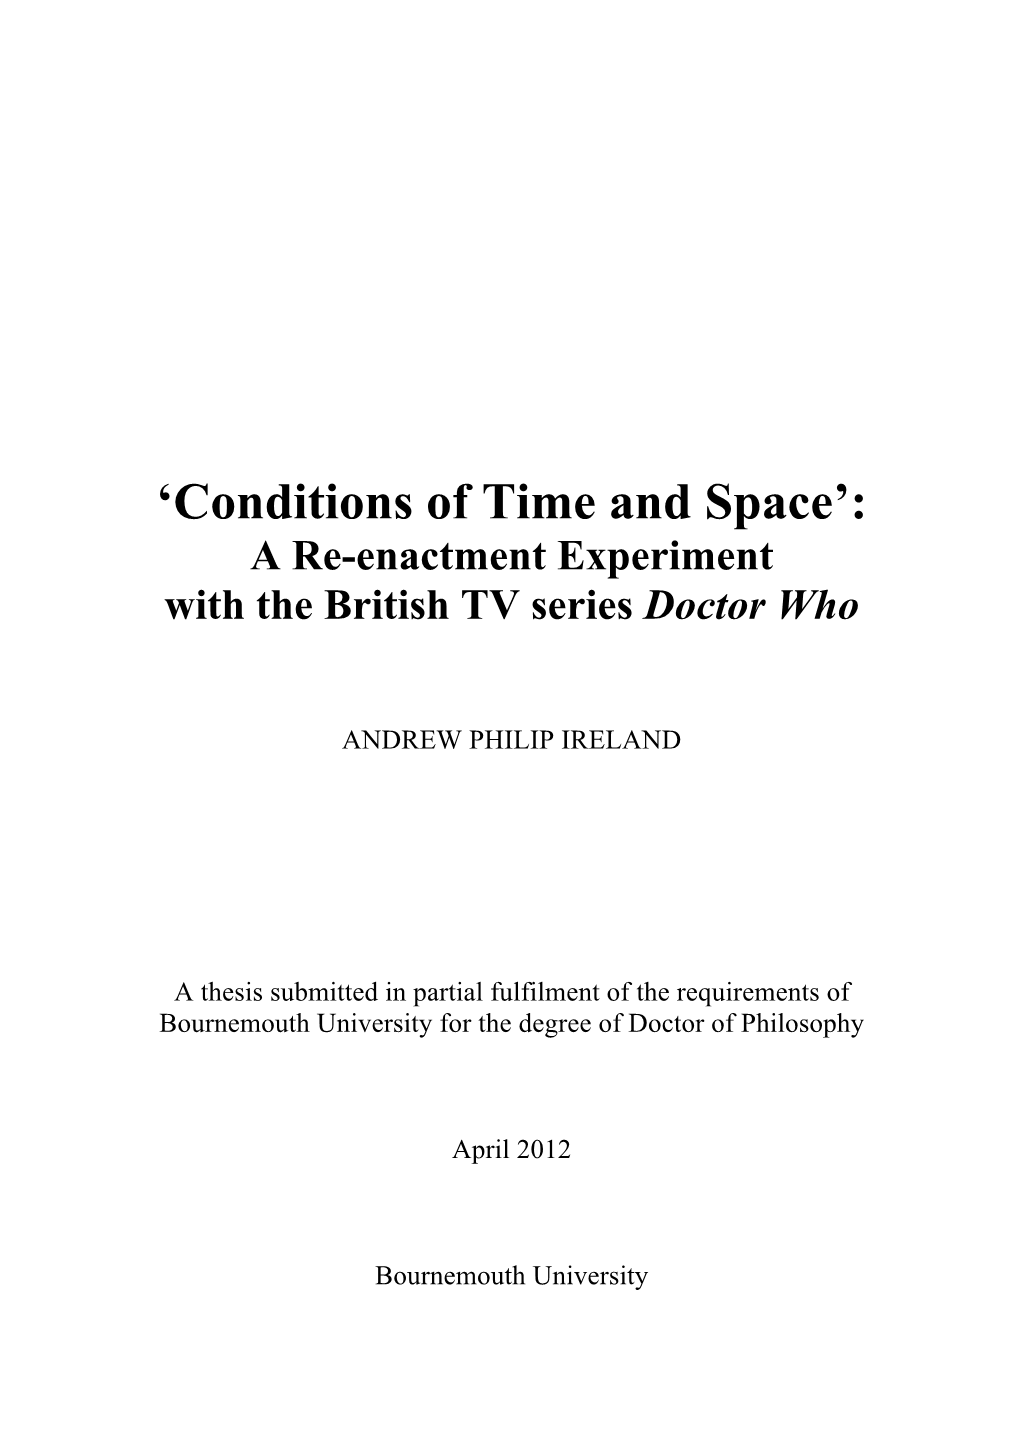 'Conditions of Time and Space'